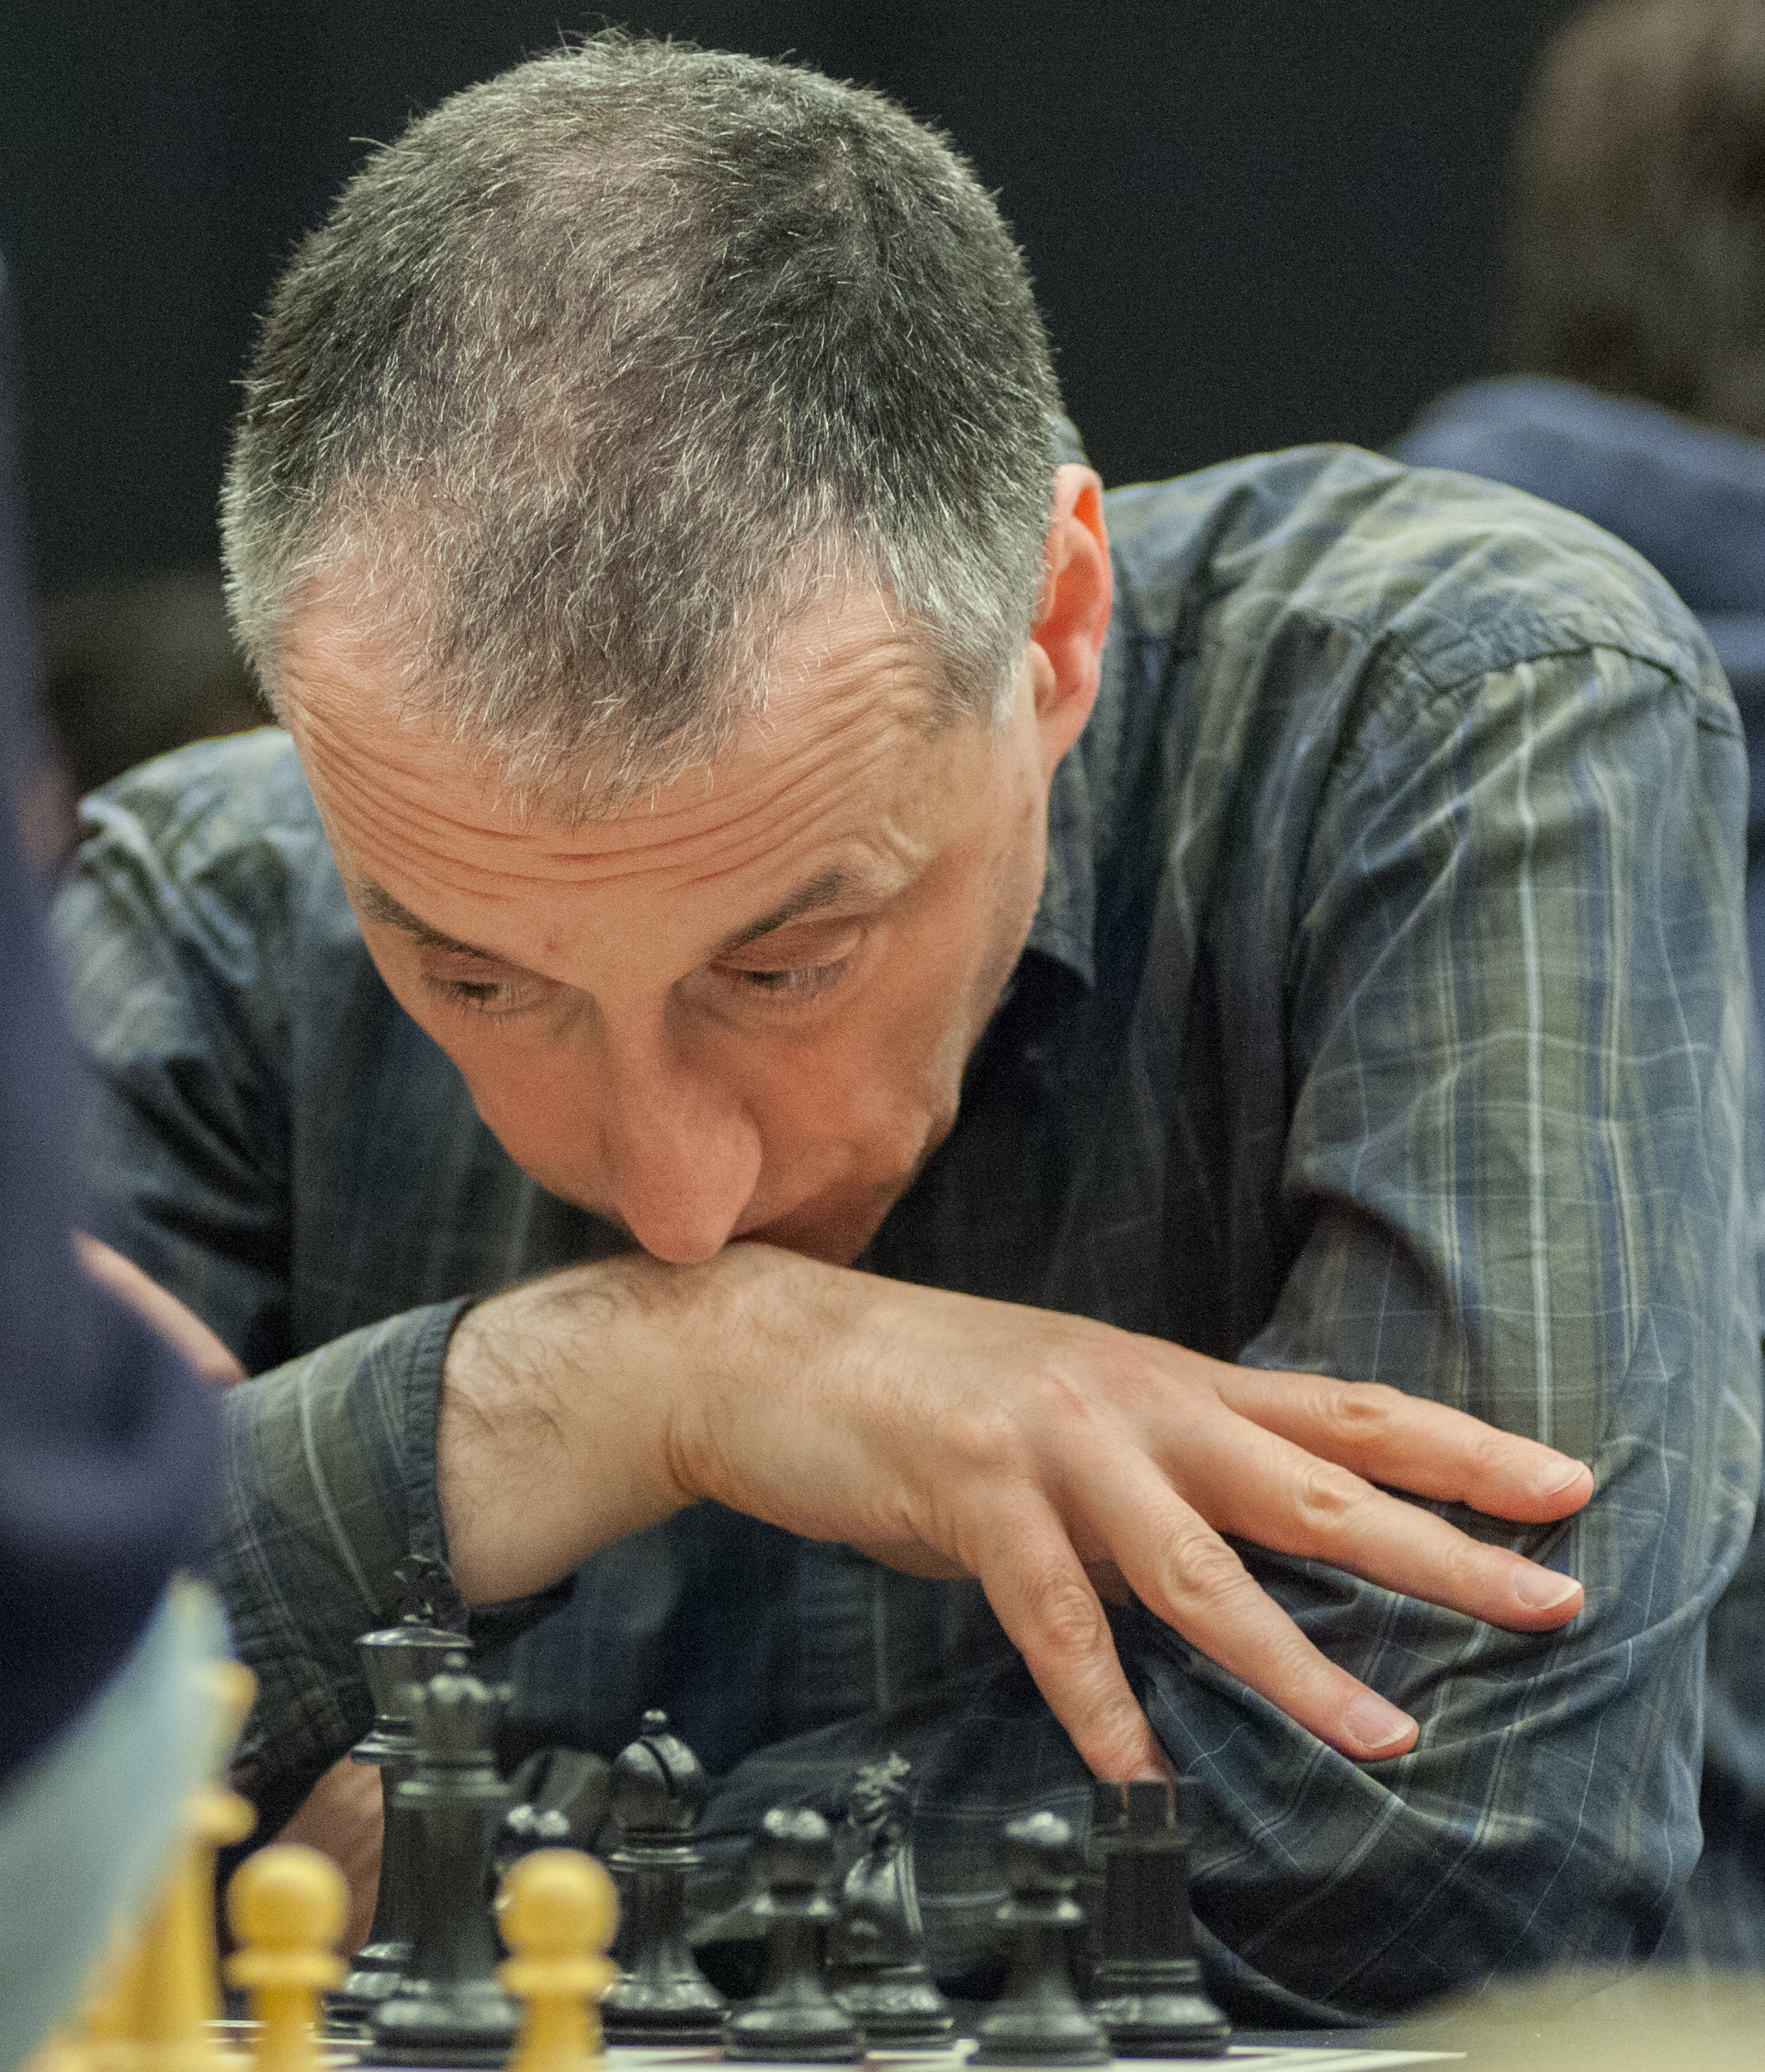 IM Malcolm Pein at the King's Place Rapidplay 2013, photograph courtesy of John Upham